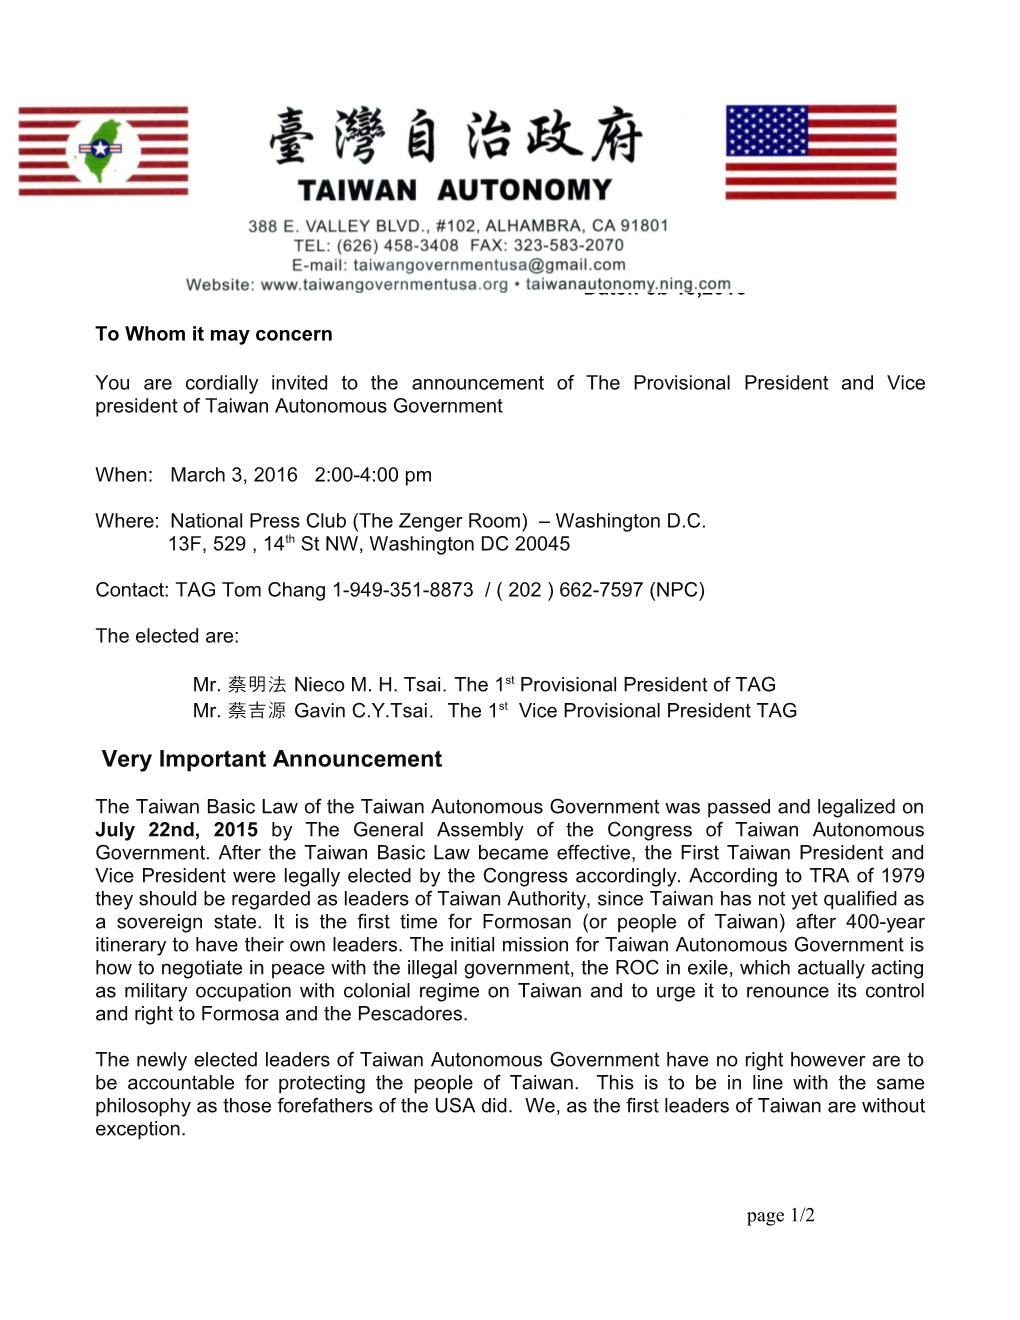 Invitation to the Announcement of the Provisional President and Vice President of Taiwan